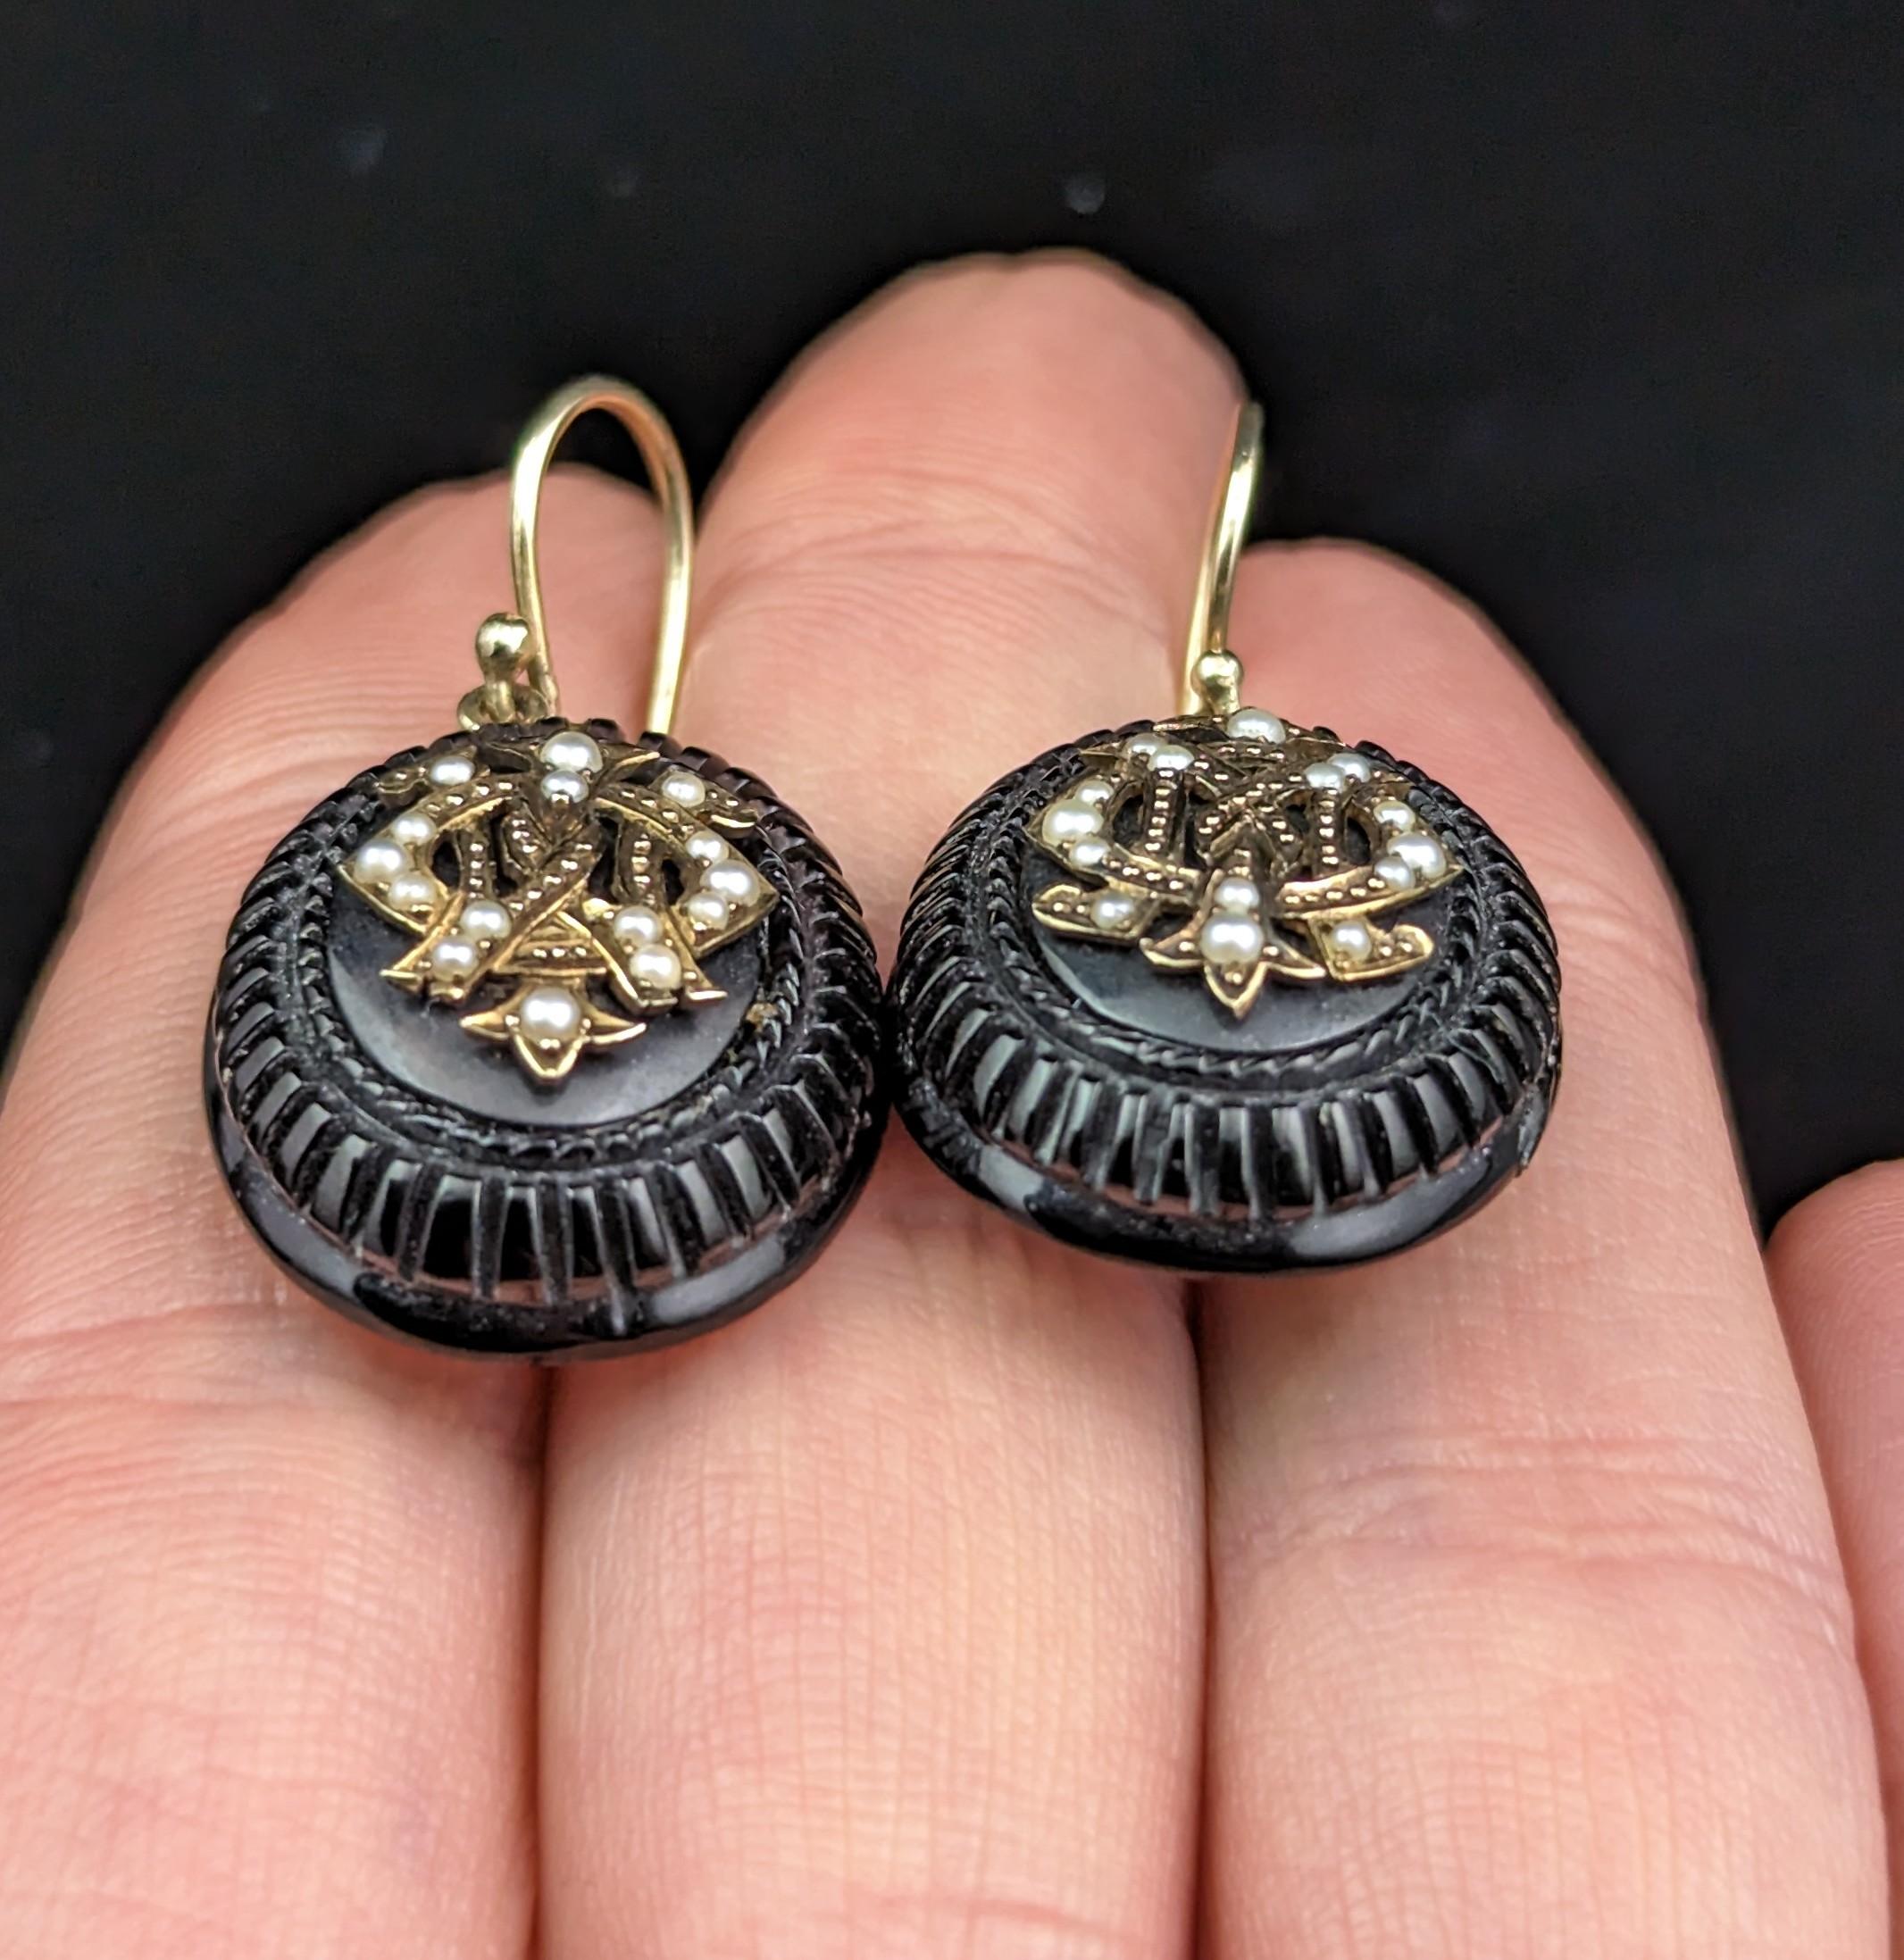 Antique Whitby Jet Mourning Earrings, 9k Gold and Seed Pearl, IMO 2